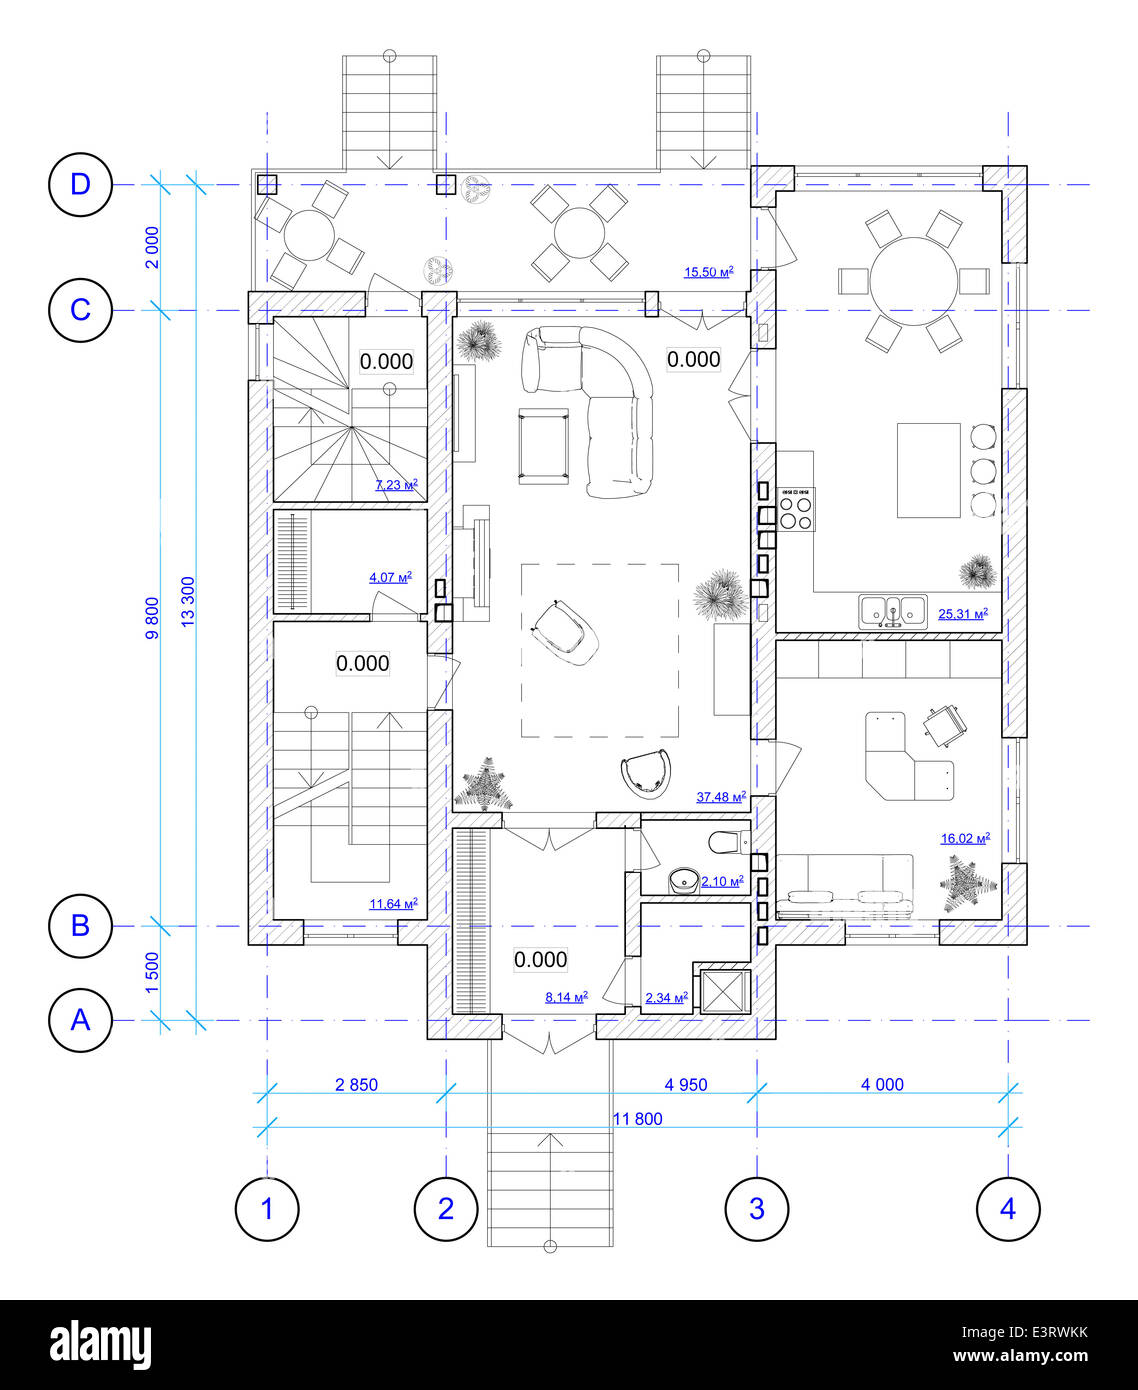 Architectural layout of first floor of house Stock Photo